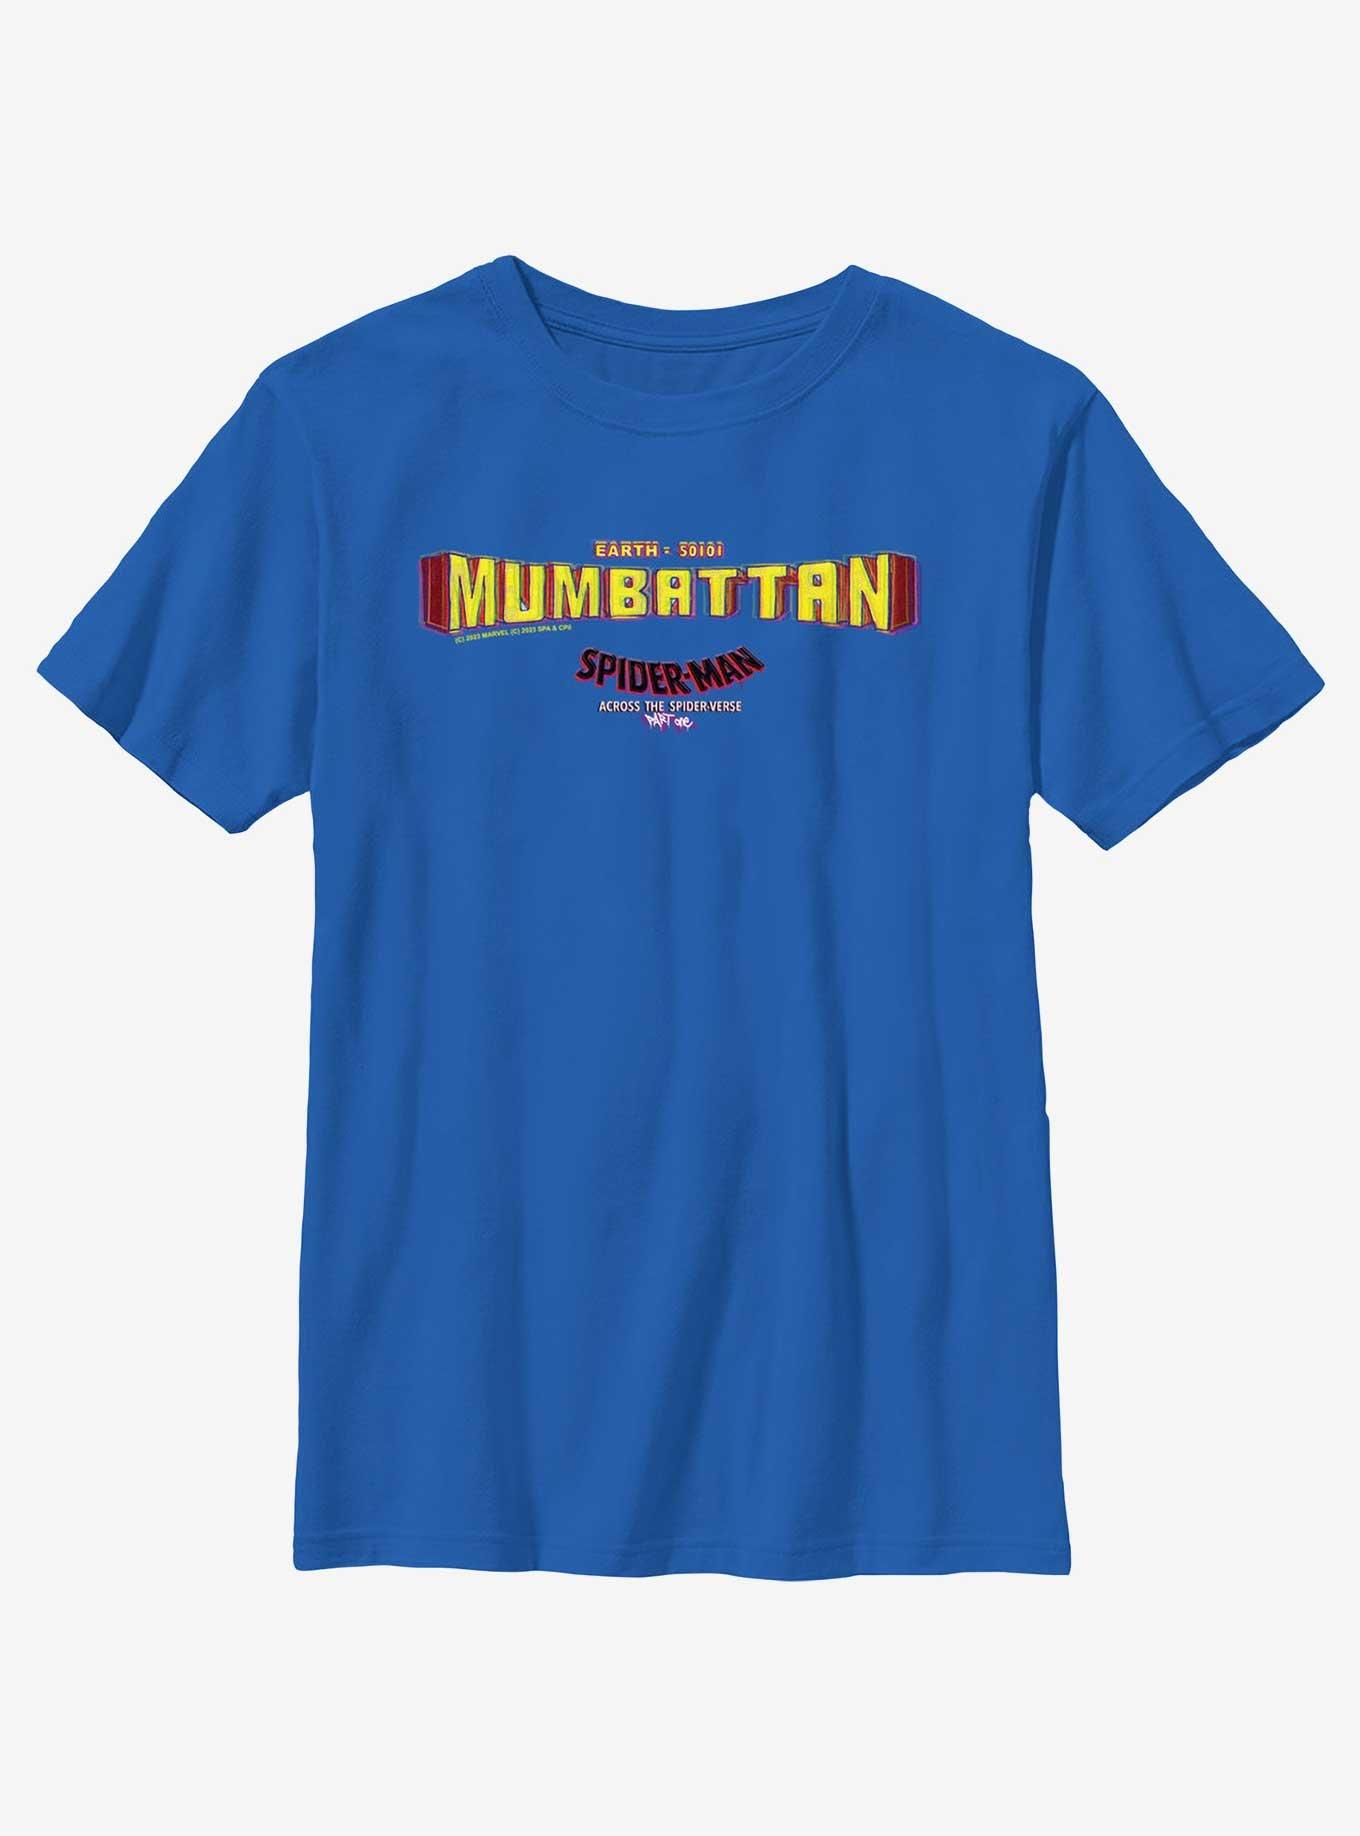 Marvel Spider-Man: Across The Spider-Verse Mumbattan Earth-50101 Youth T-Shirt, ROYAL, hi-res